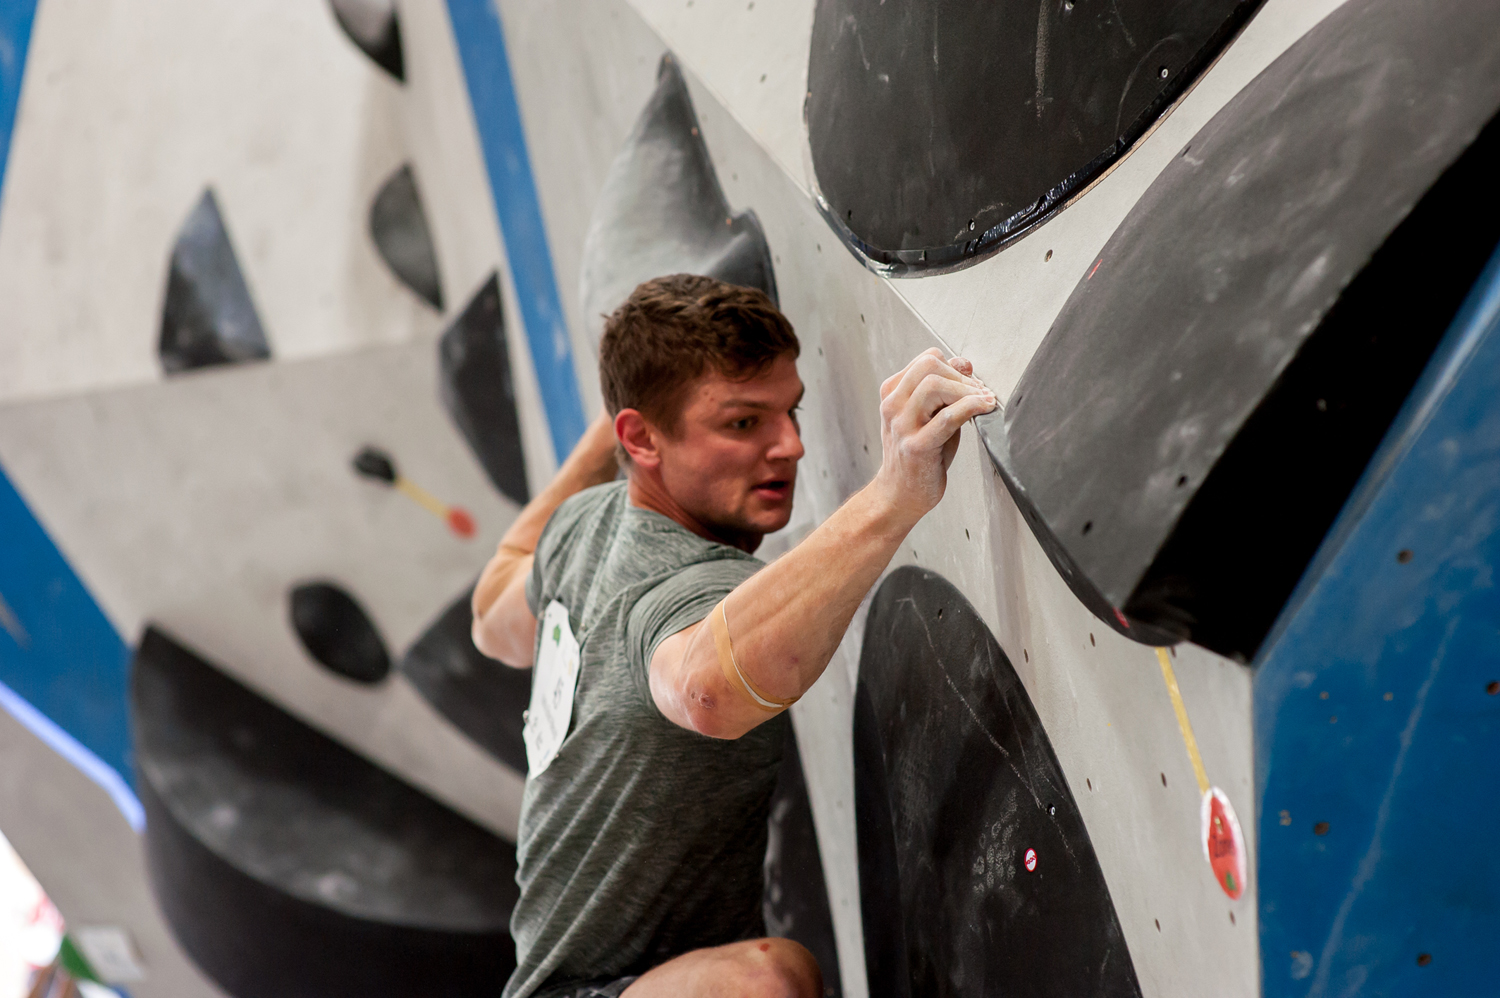 Climbing Rocks Professional Climbing Photography Competition Open Bouldering Championships 2019 (11)